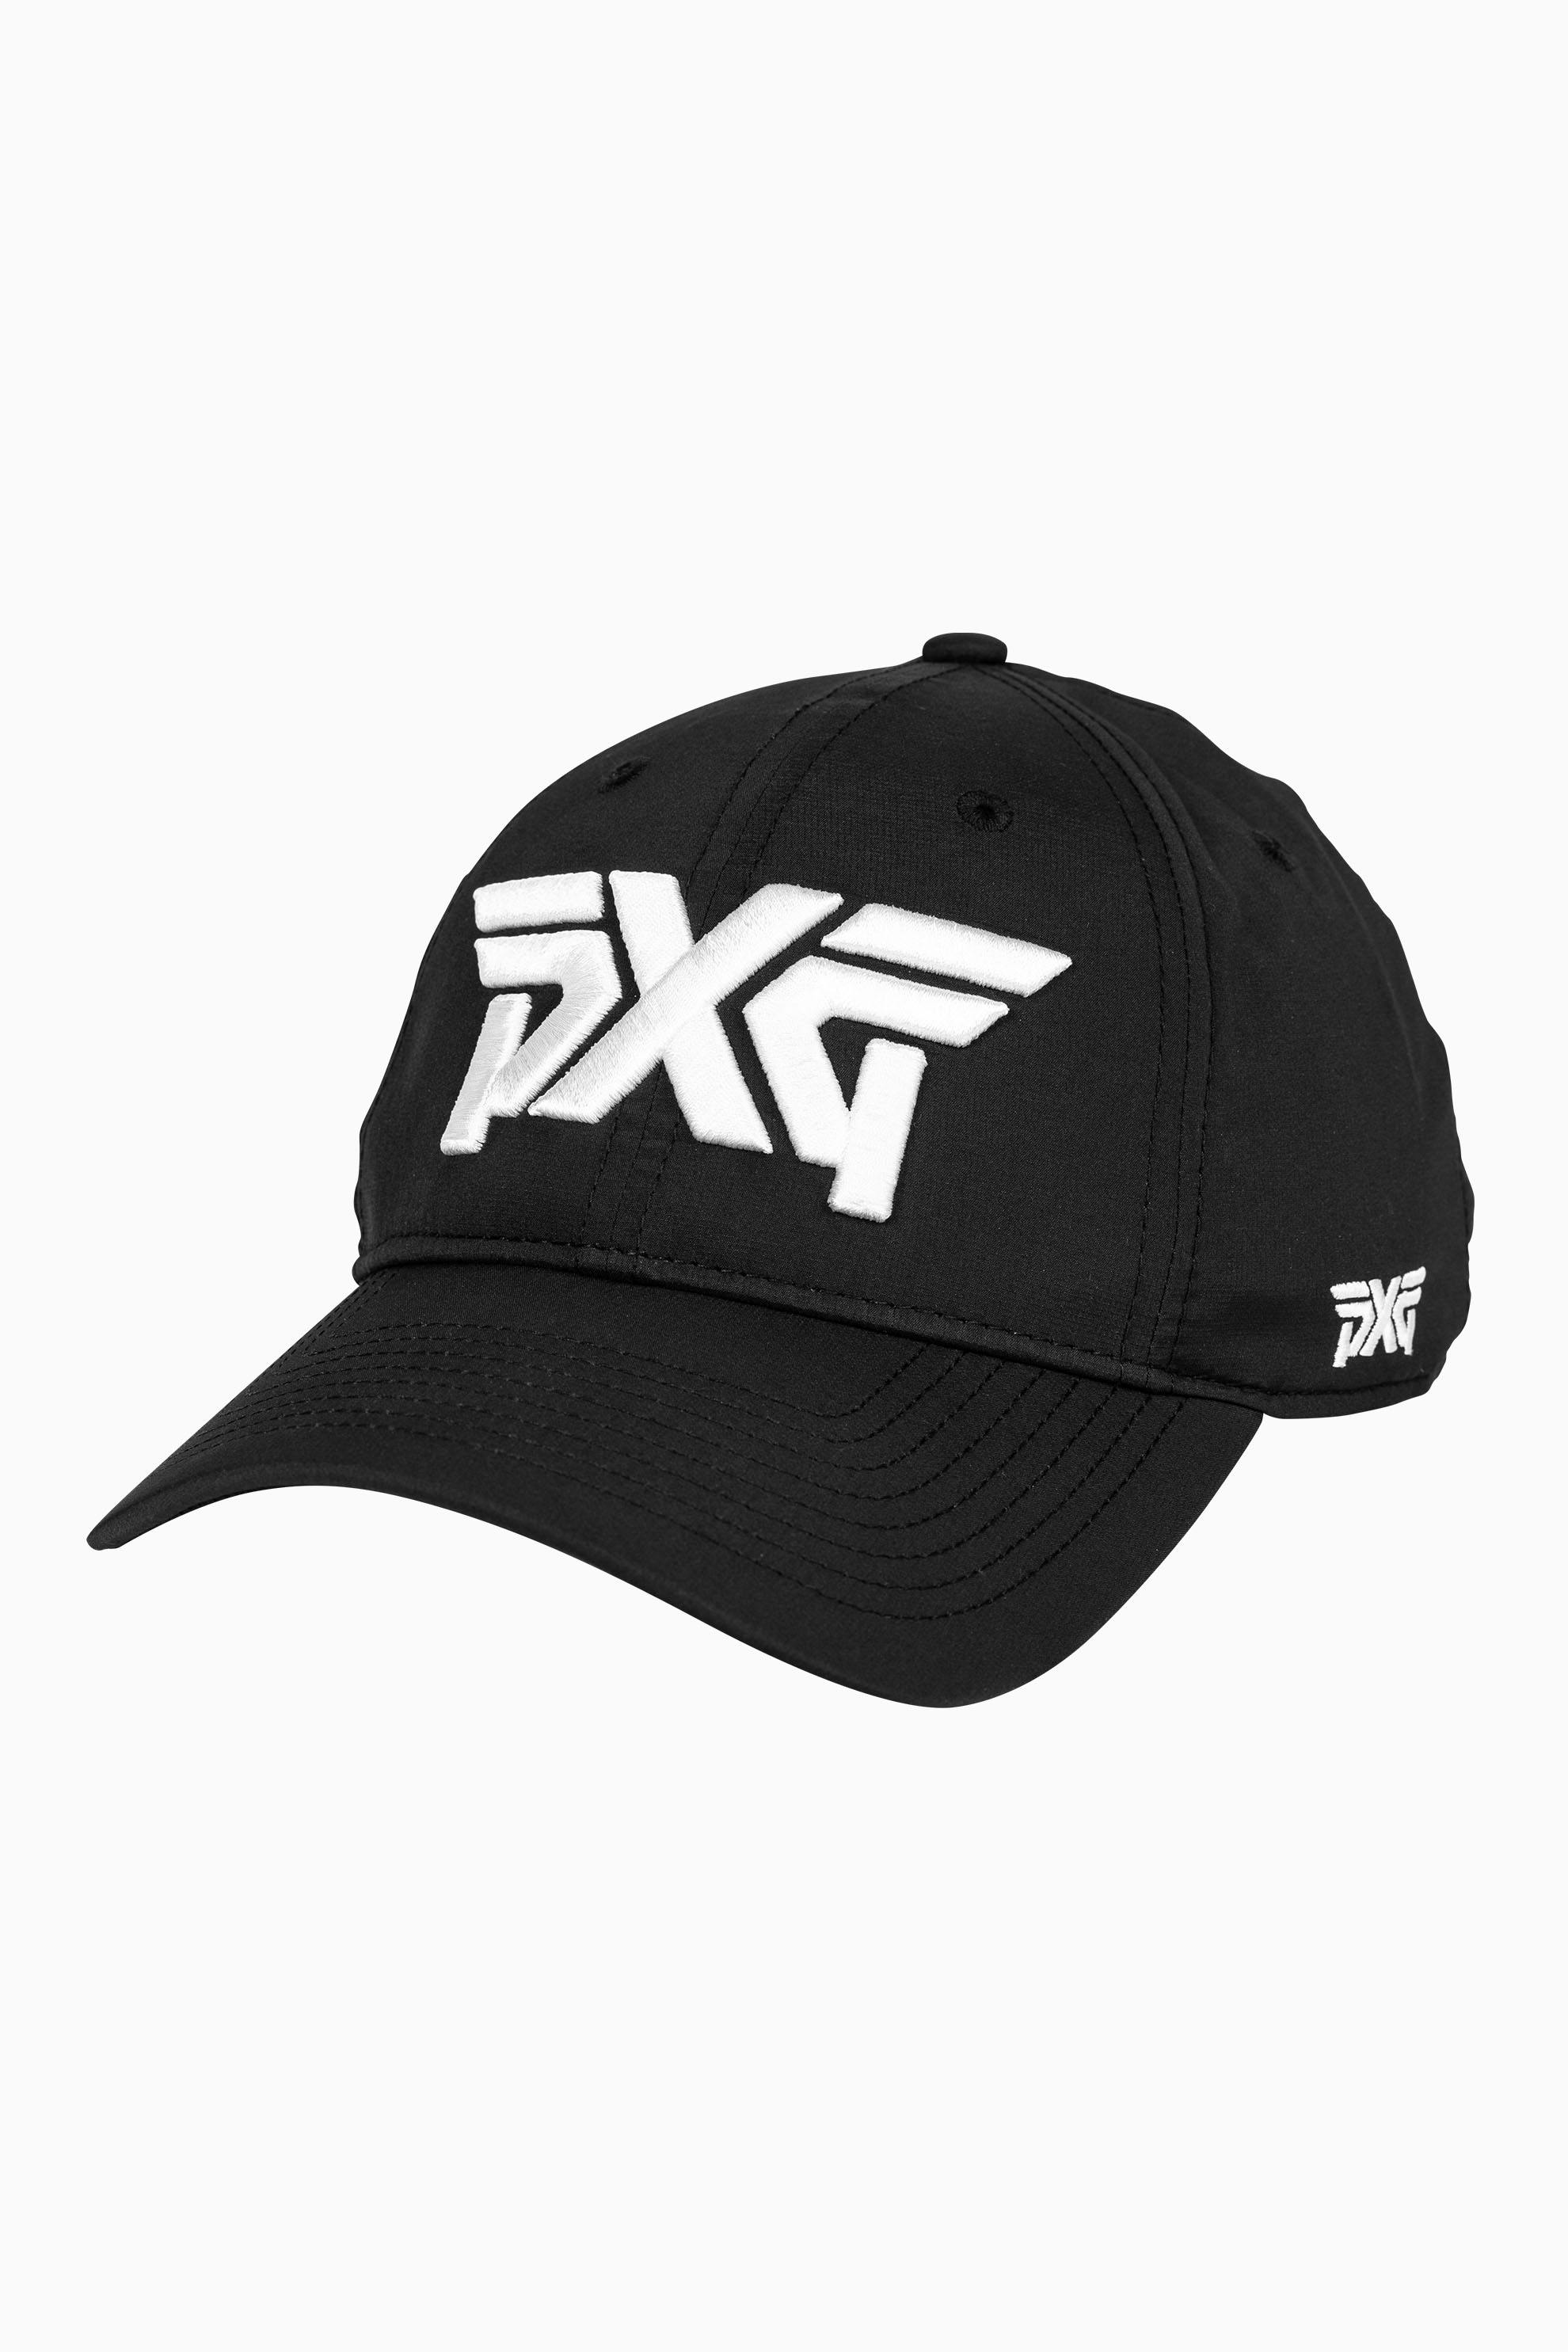 Men's Lightweight Unstructured Low Crown  Shop the Highest Quality Golf  Apparel, Gear, Accessories and Golf Clubs at PXG